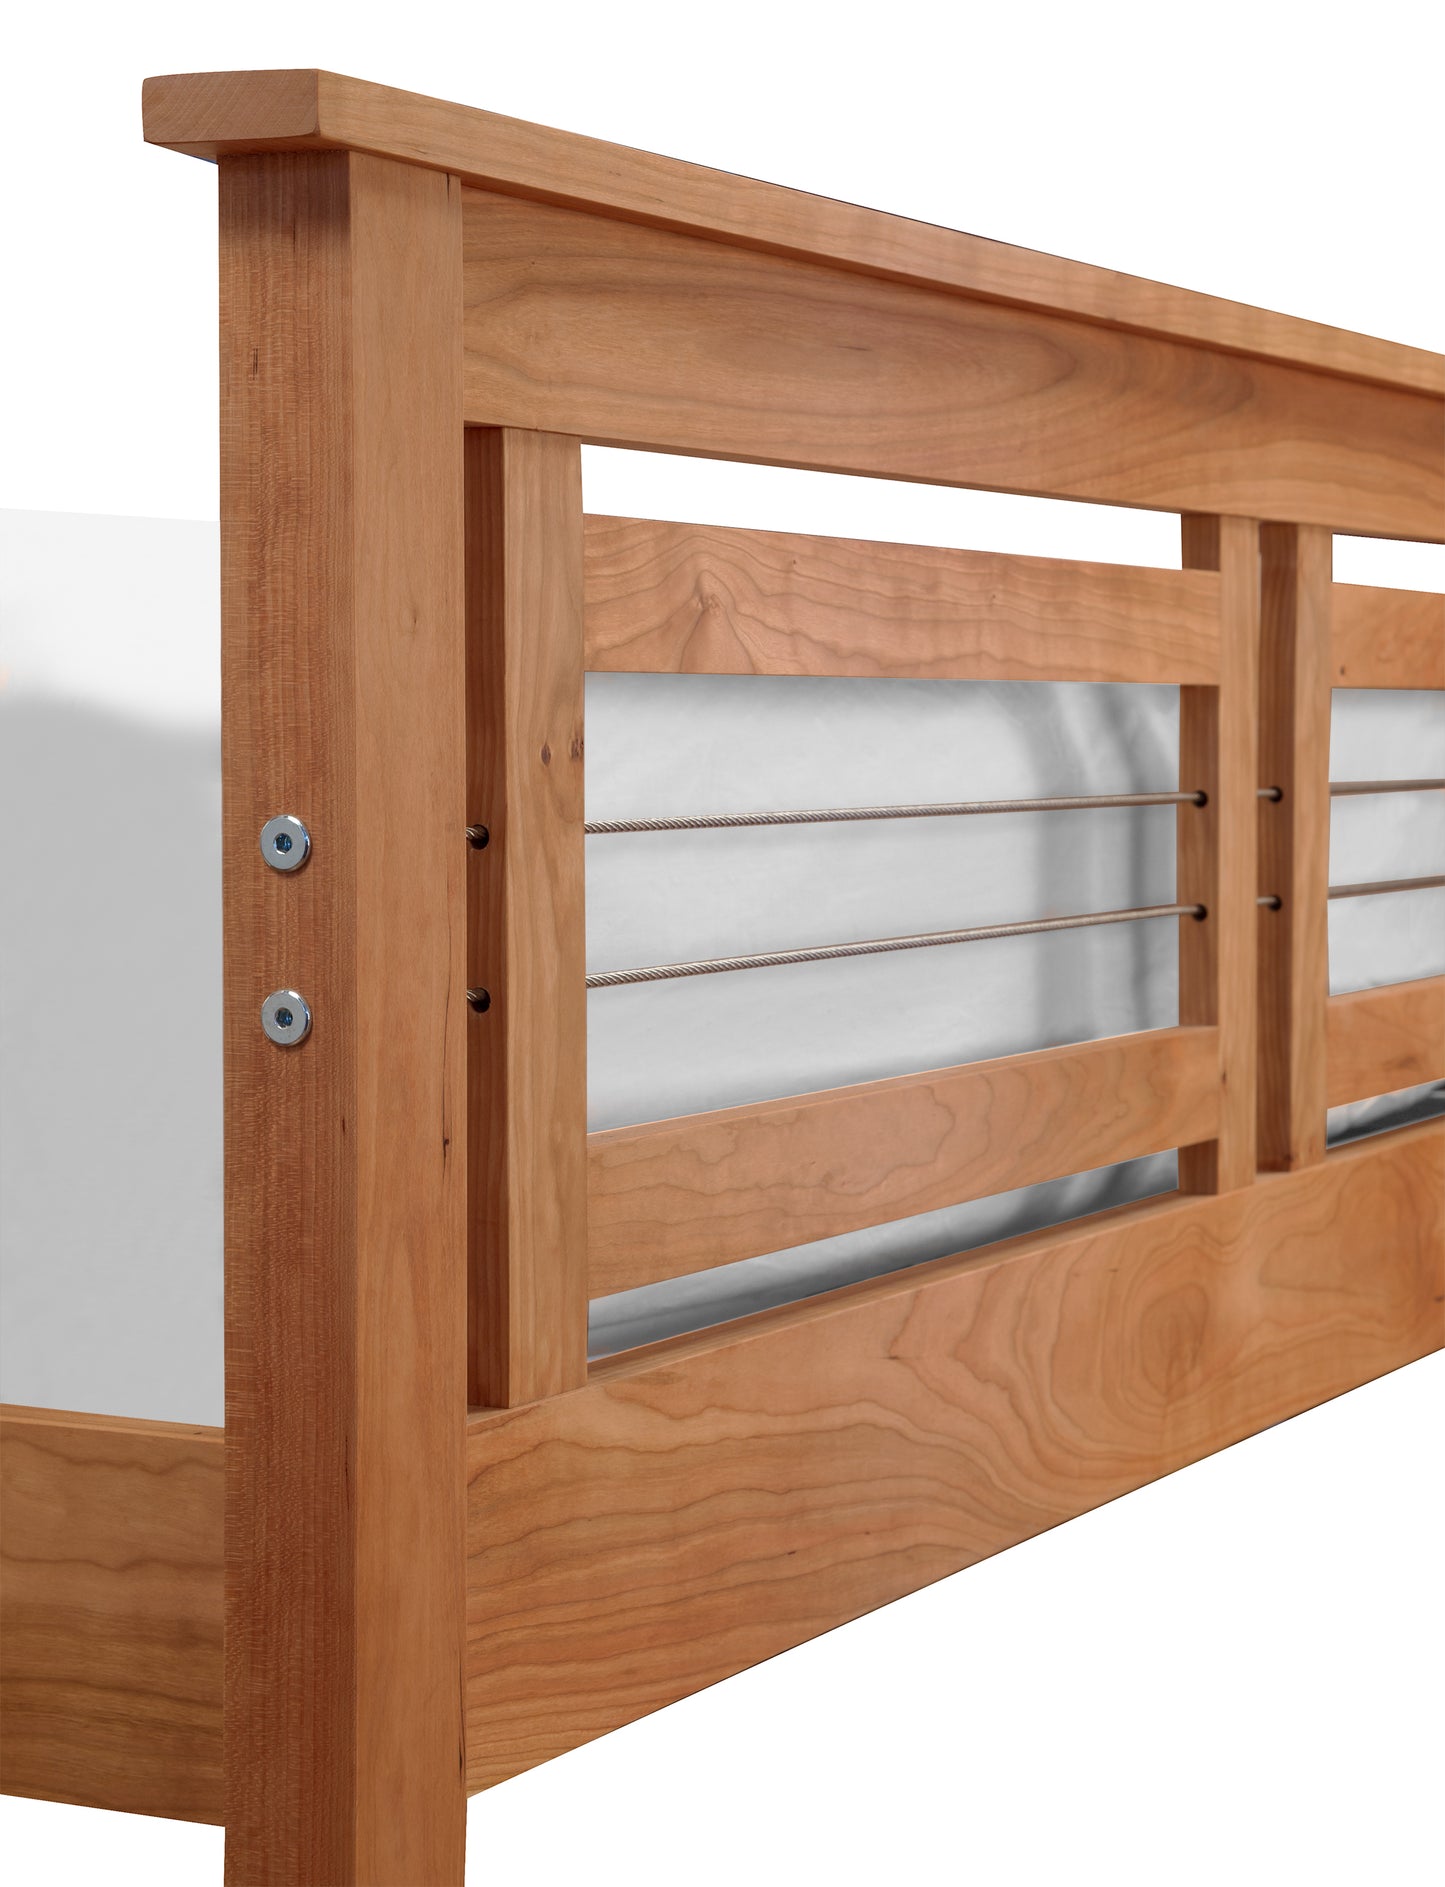 Partial view of a Vermont Furniture Designs Contemporary Cable Bed with a headboard featuring horizontal slats, showing one side perpendicular to a white background. Visible hardware includes several screws and bolts for assembly.